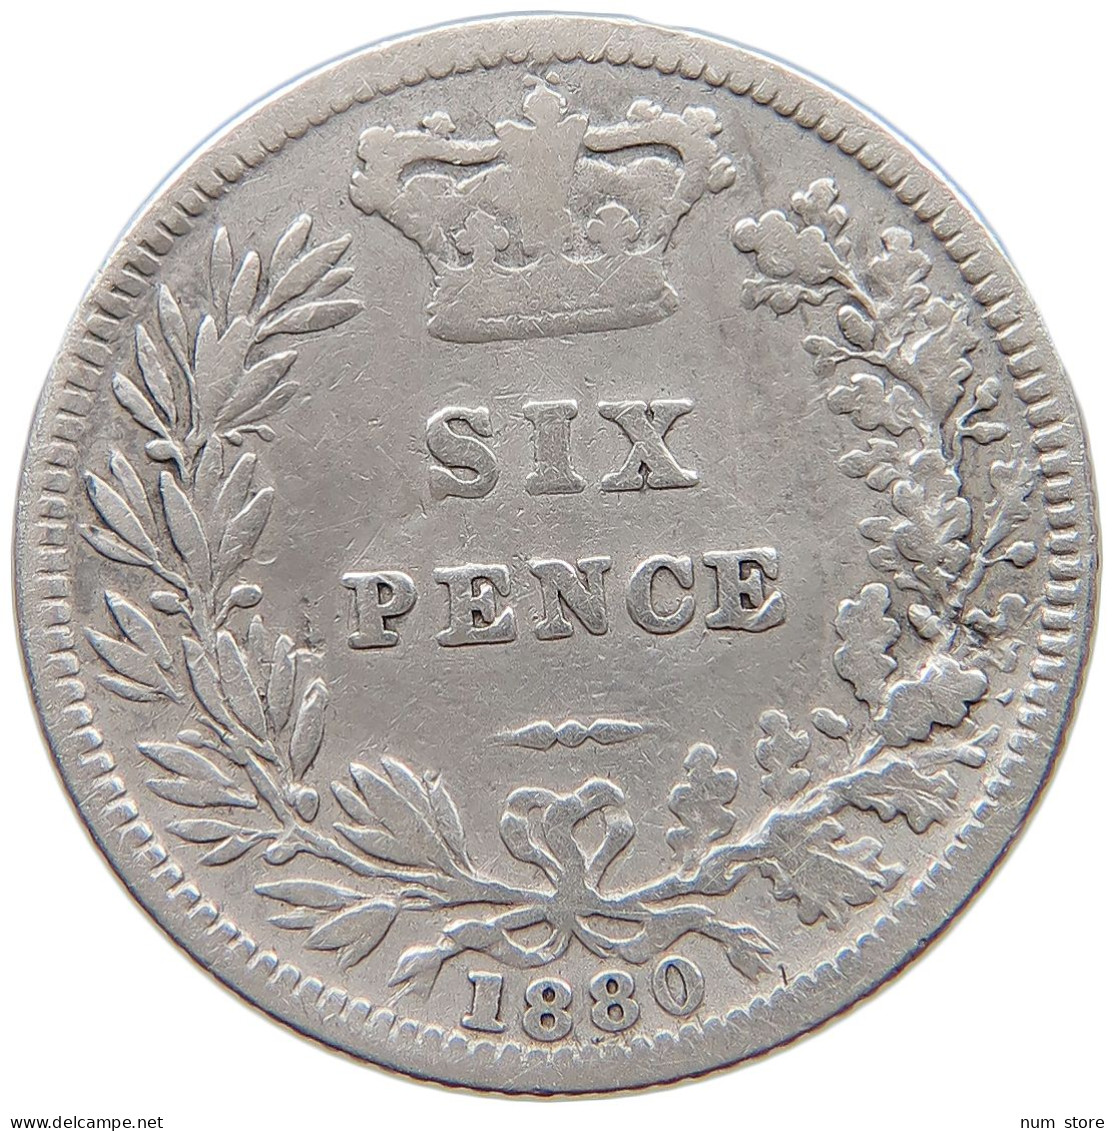 GREAT BRITAIN SIXPENCE 1880 Victoria 1837-1901 #s038 0563 - H. 6 Pence